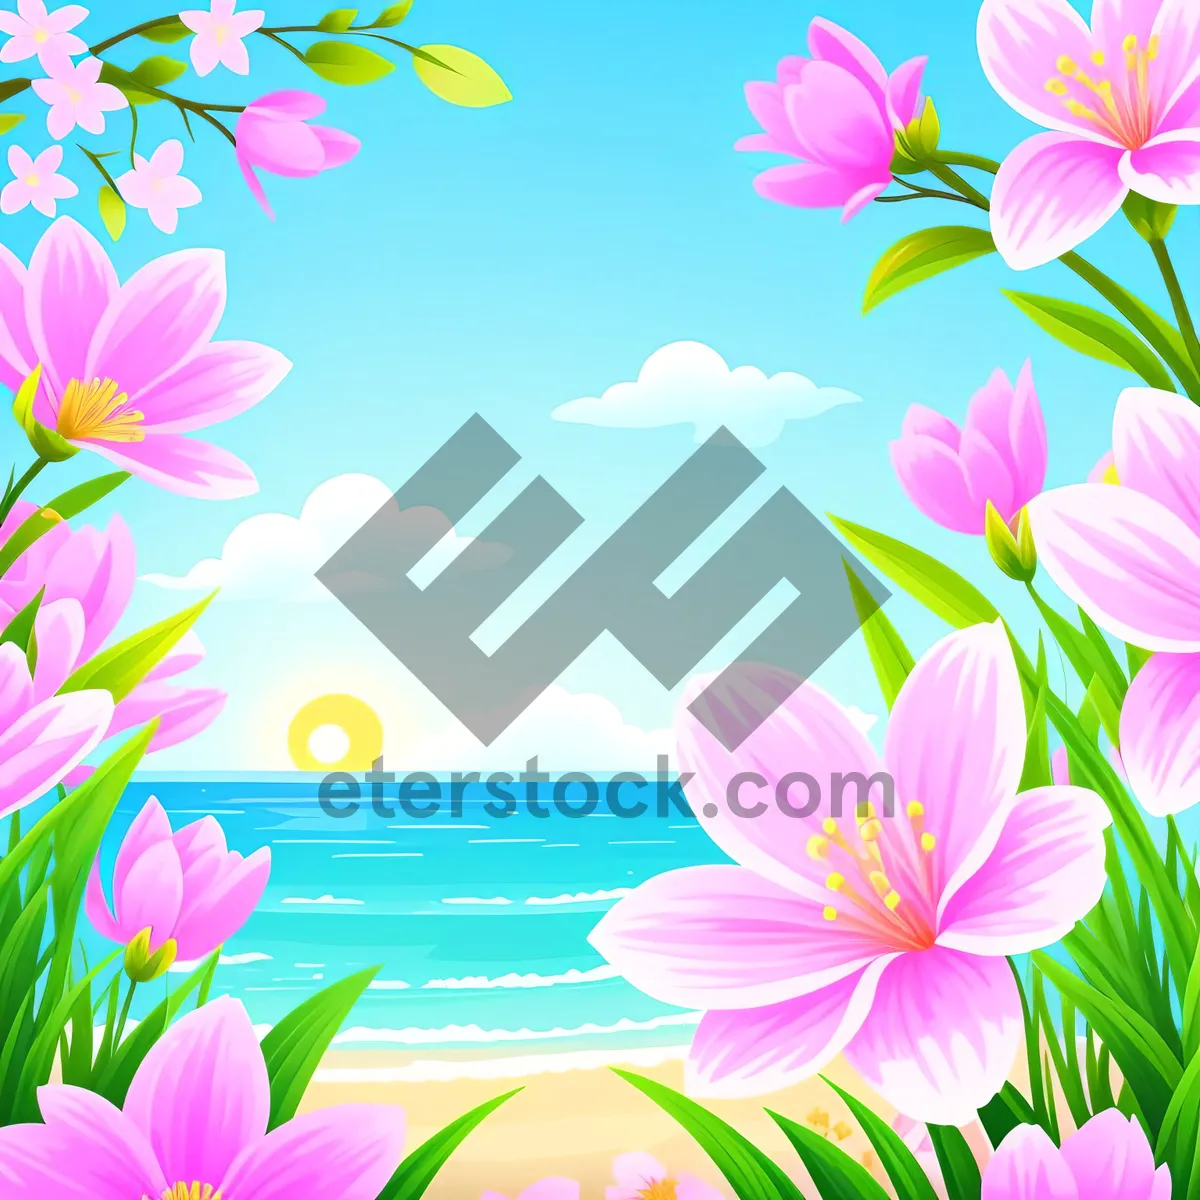 Picture of Colorful Floral Design with Pink Tulips and Leaf